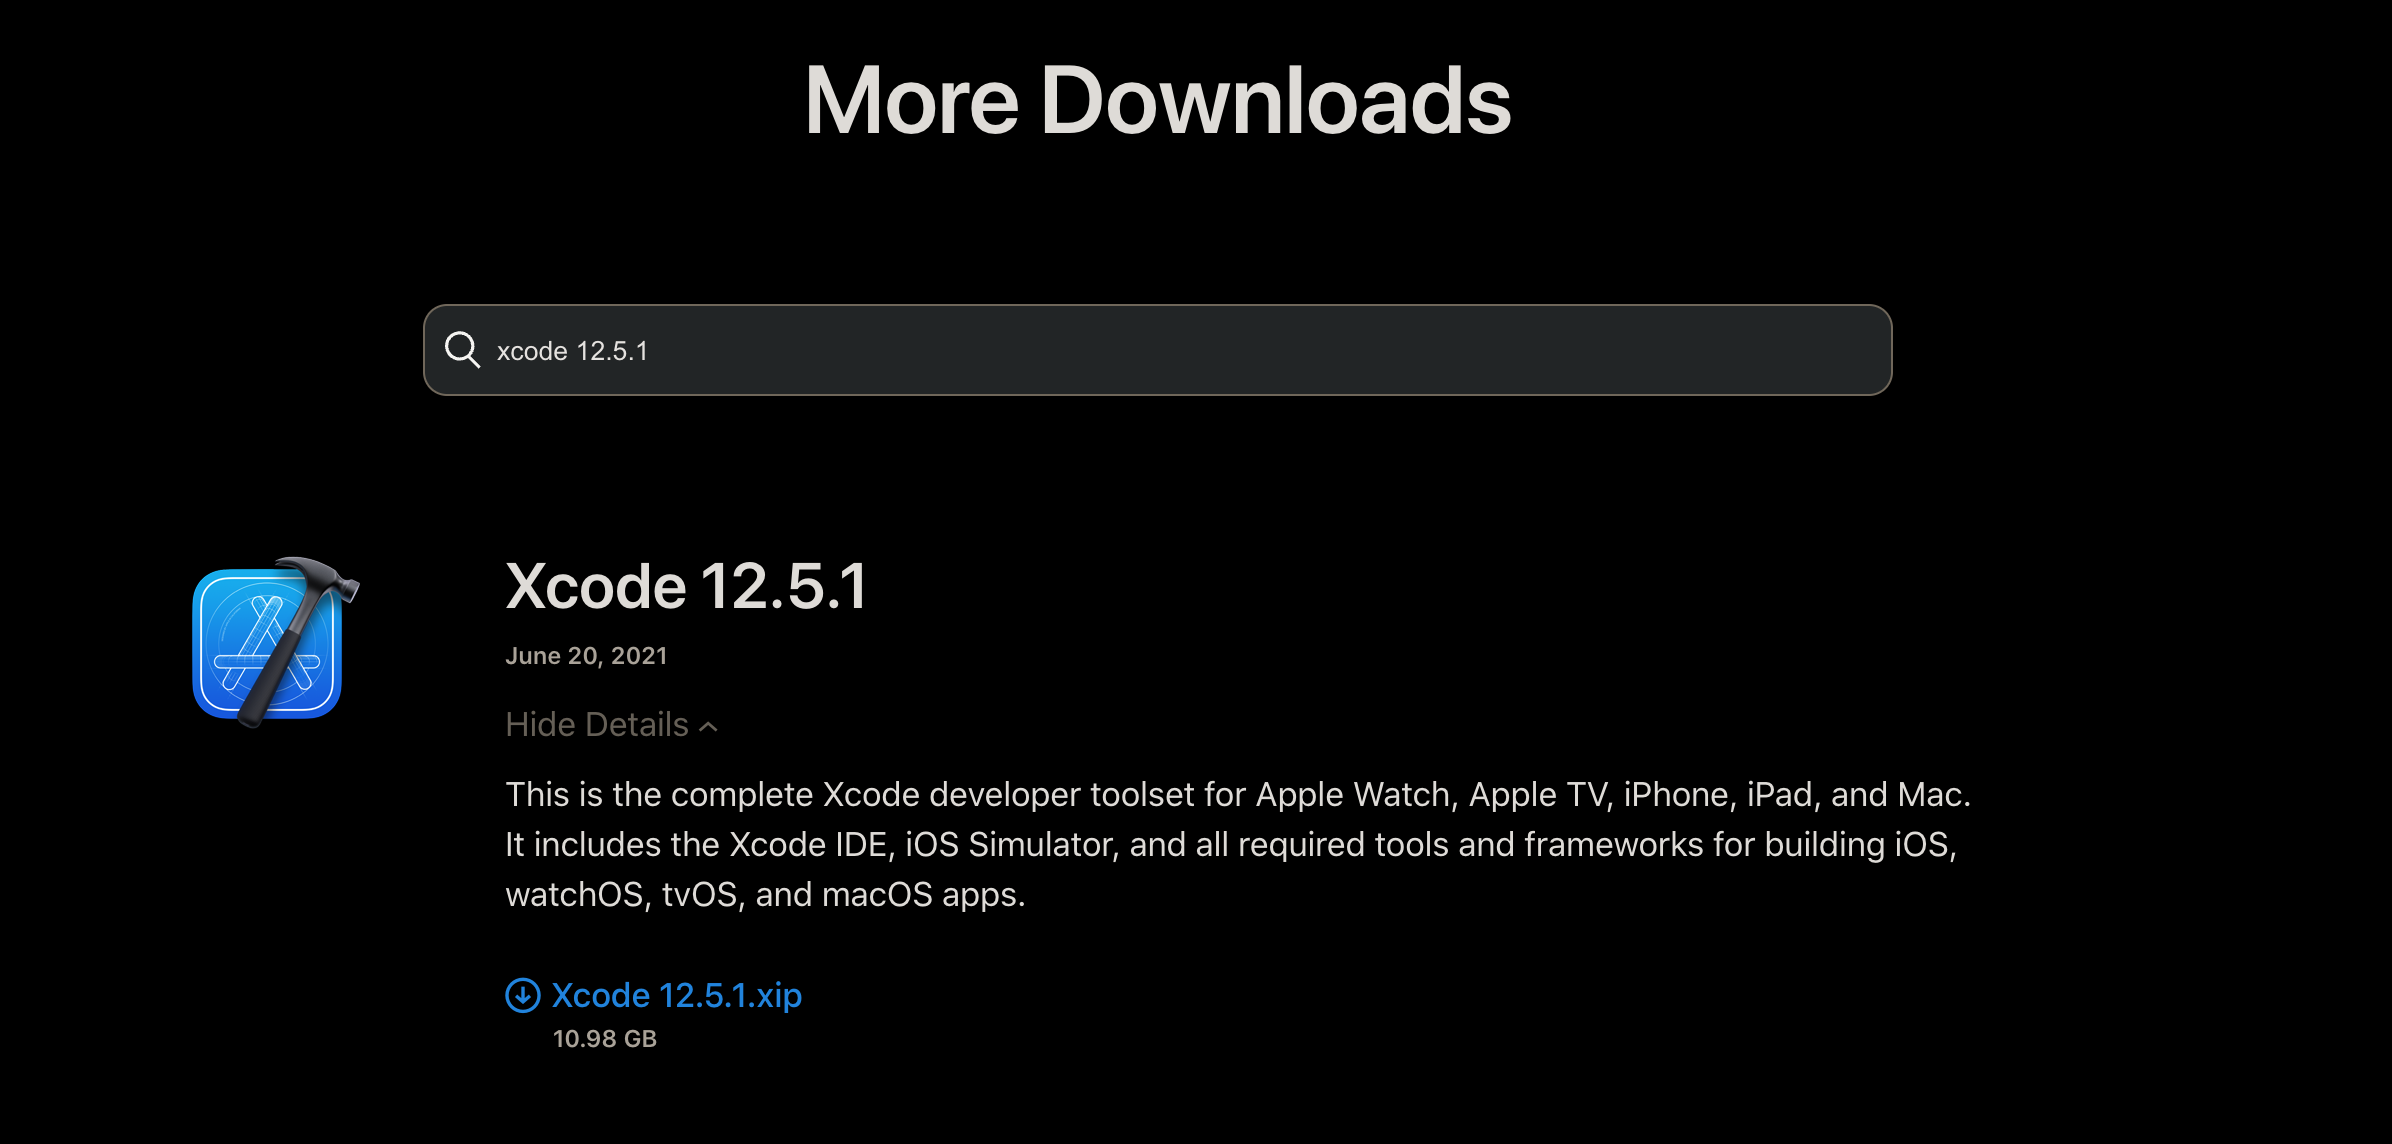 Download version 12.5.1 of Xcode